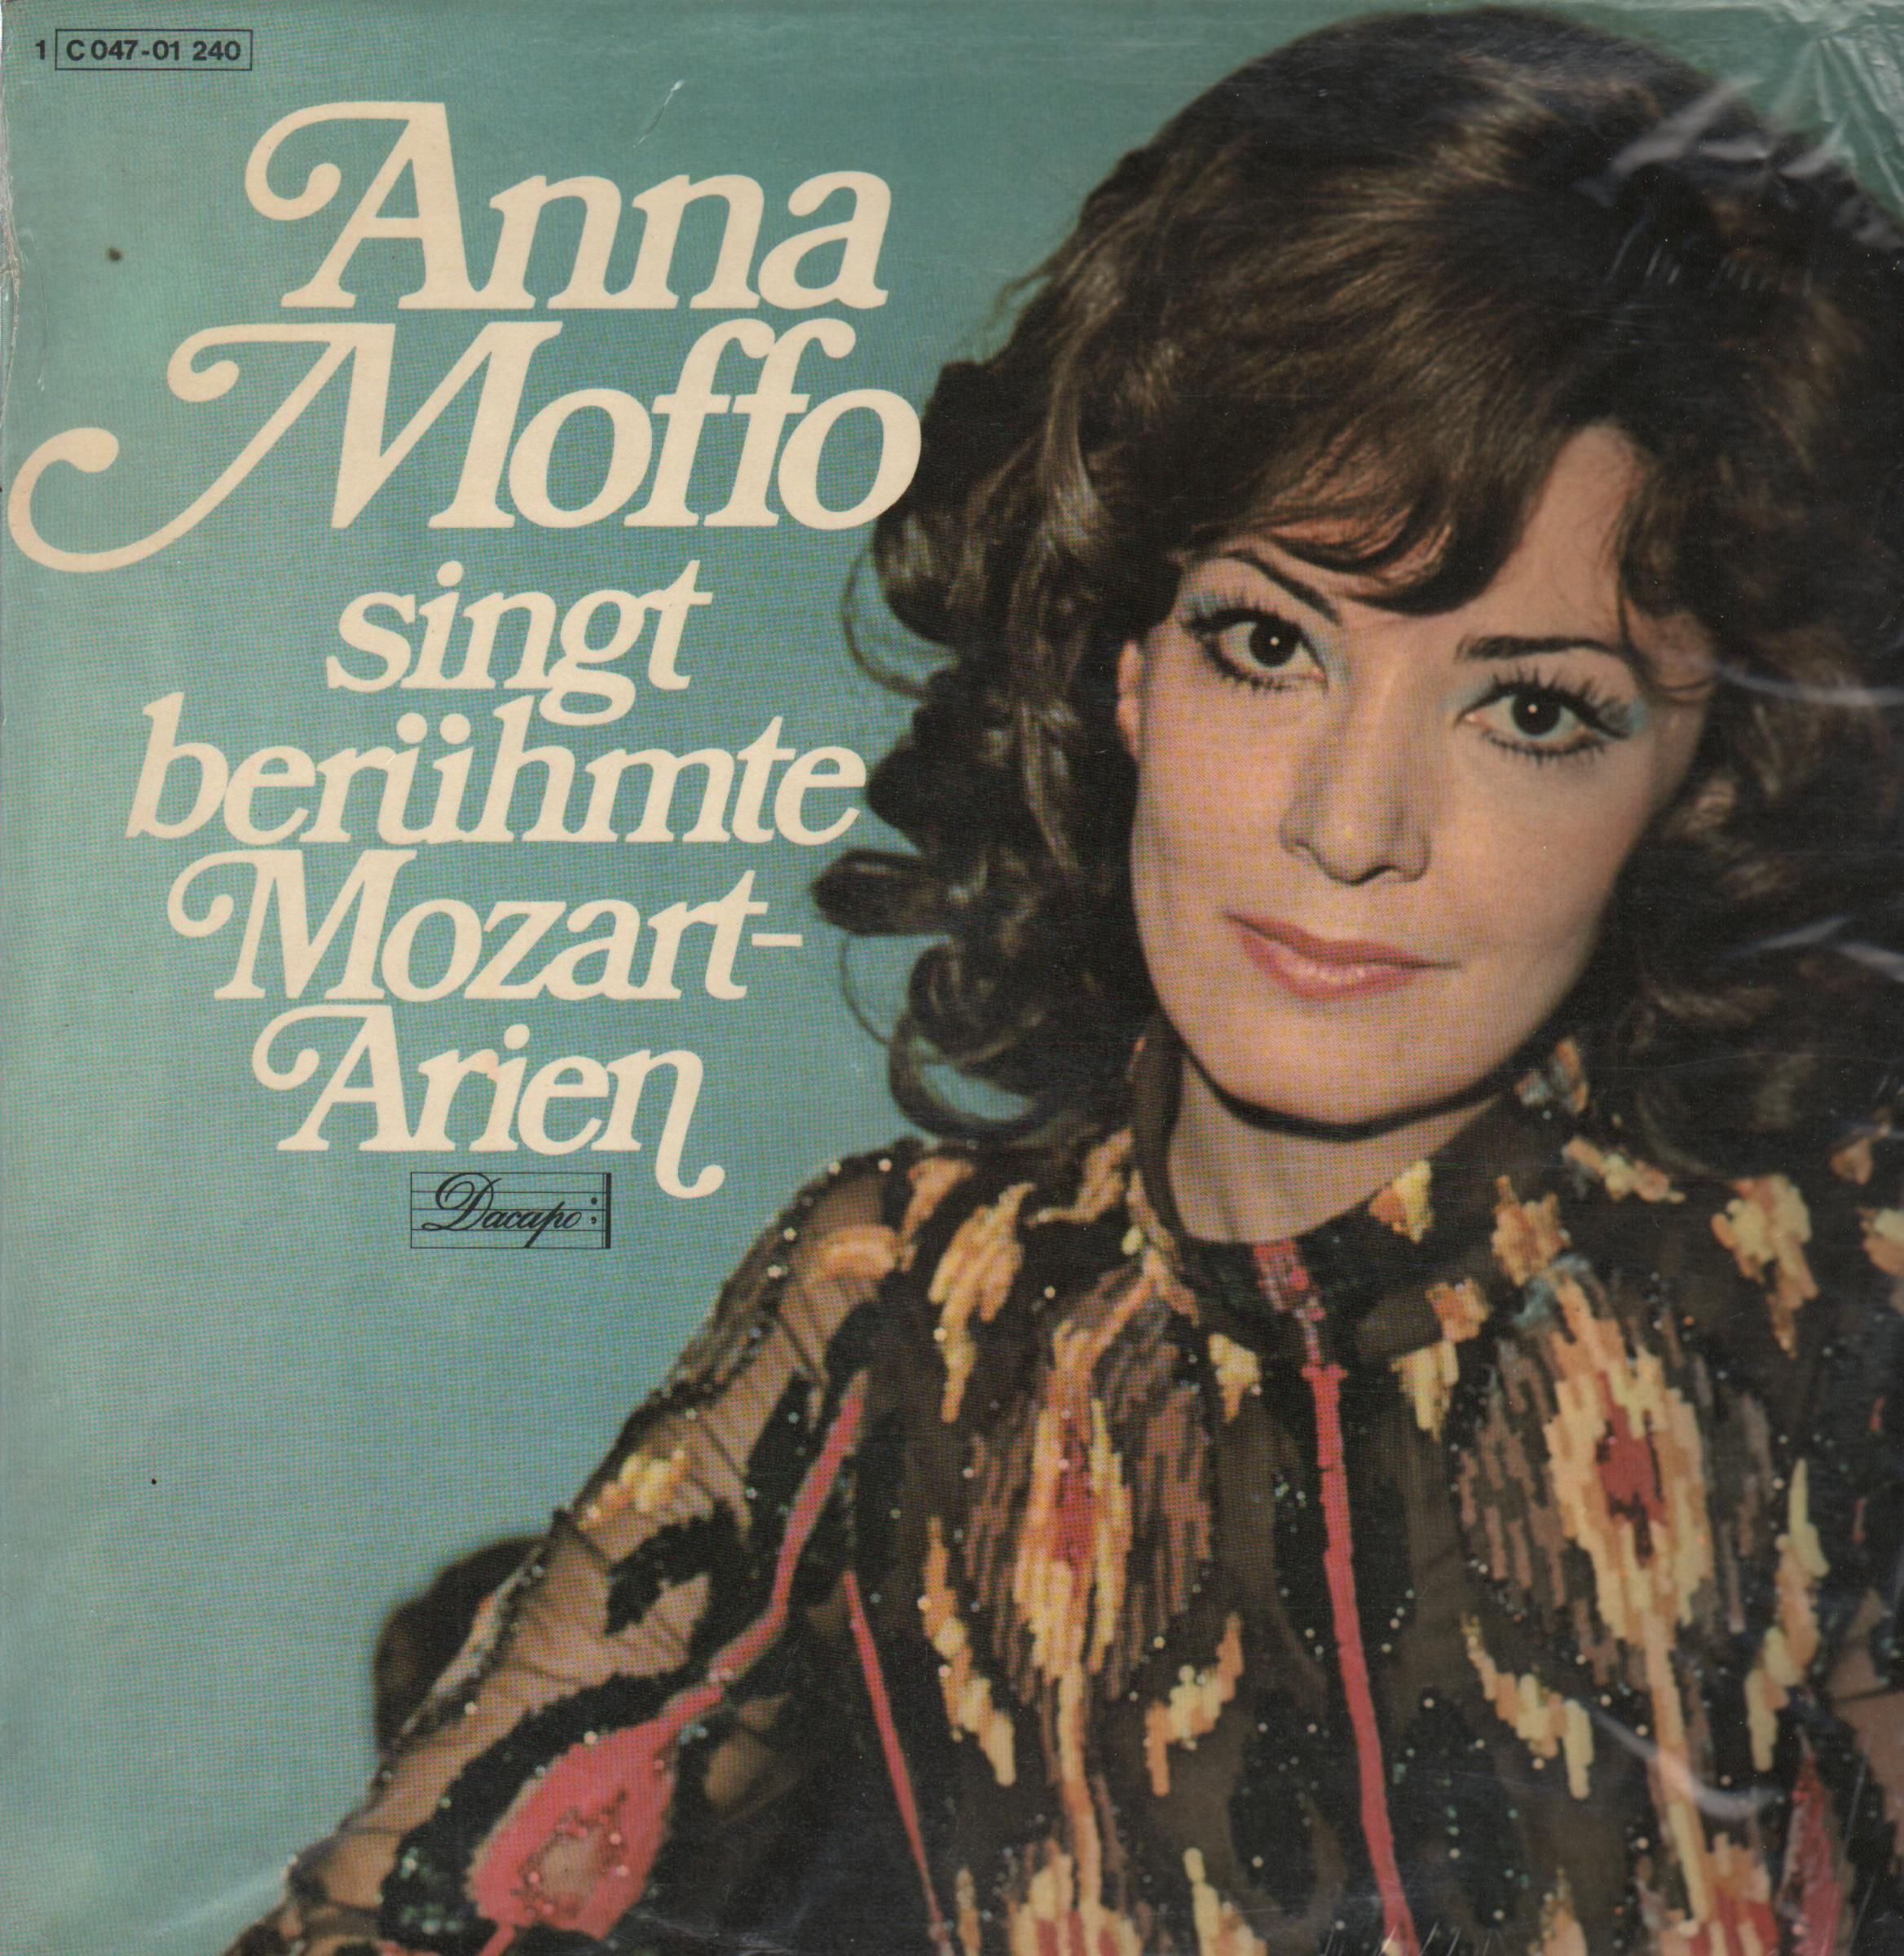 Anna Moffo Records, LPs, Vinyl And CDs - MusicStack